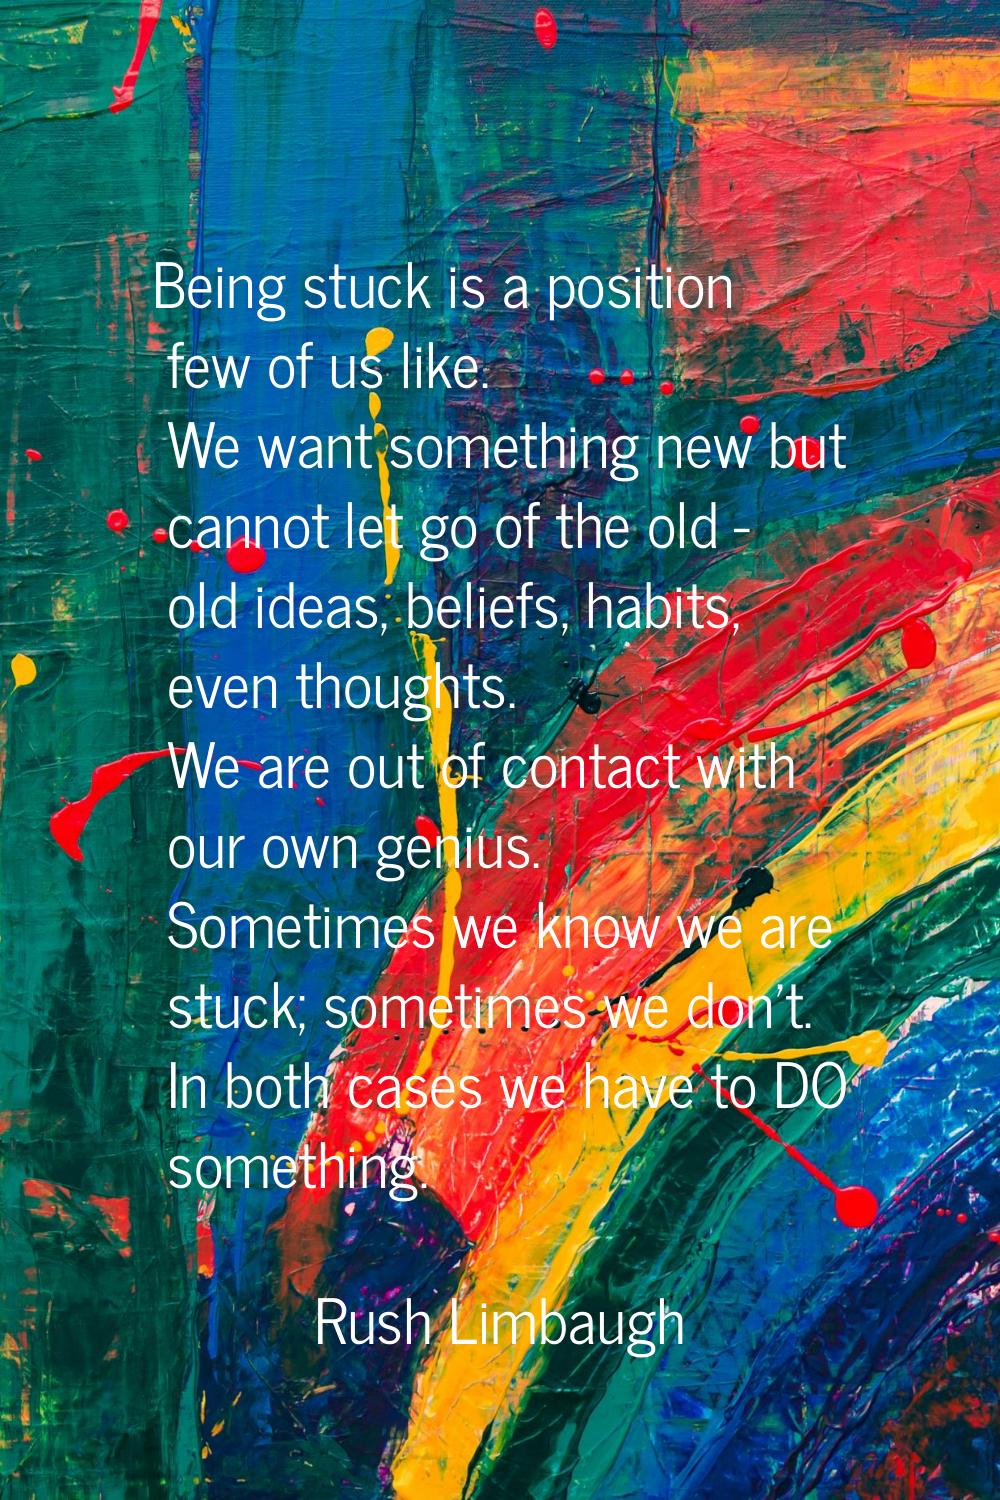 Being stuck is a position few of us like. We want something new but cannot let go of the old - old 